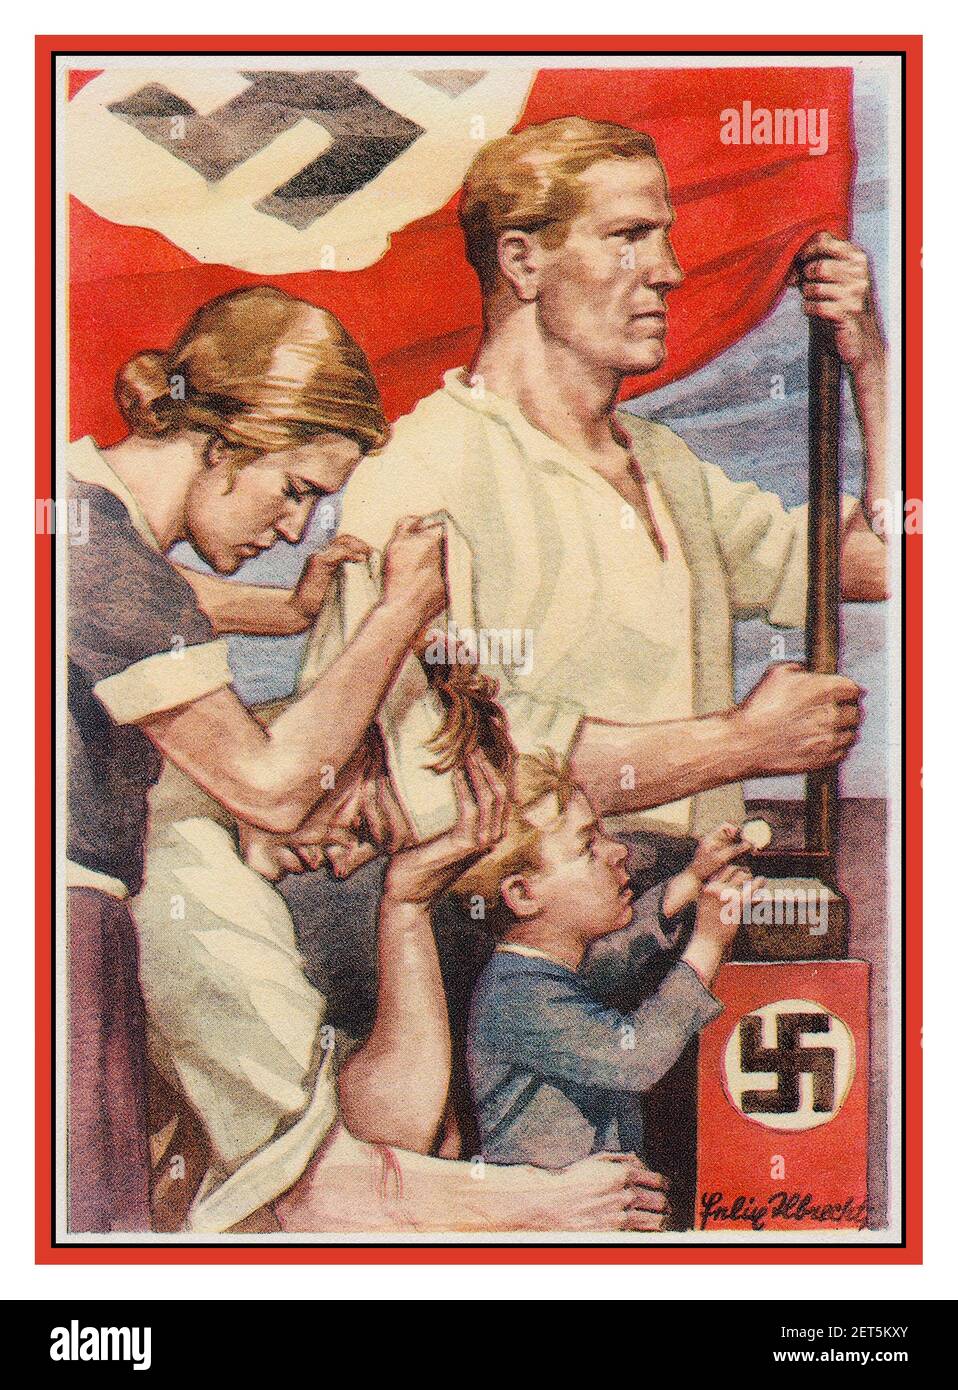 1930's Vintage Poster card NSDAP party donation propaganda from Felix Albrecht. . For the injured brownshirt street-fighters of the SA --  woman binding the fighters forehead, and the little boy putting his coin in the swastika emblazoned box to help out poor Nazi stormtroopers.1931 Stock Photo